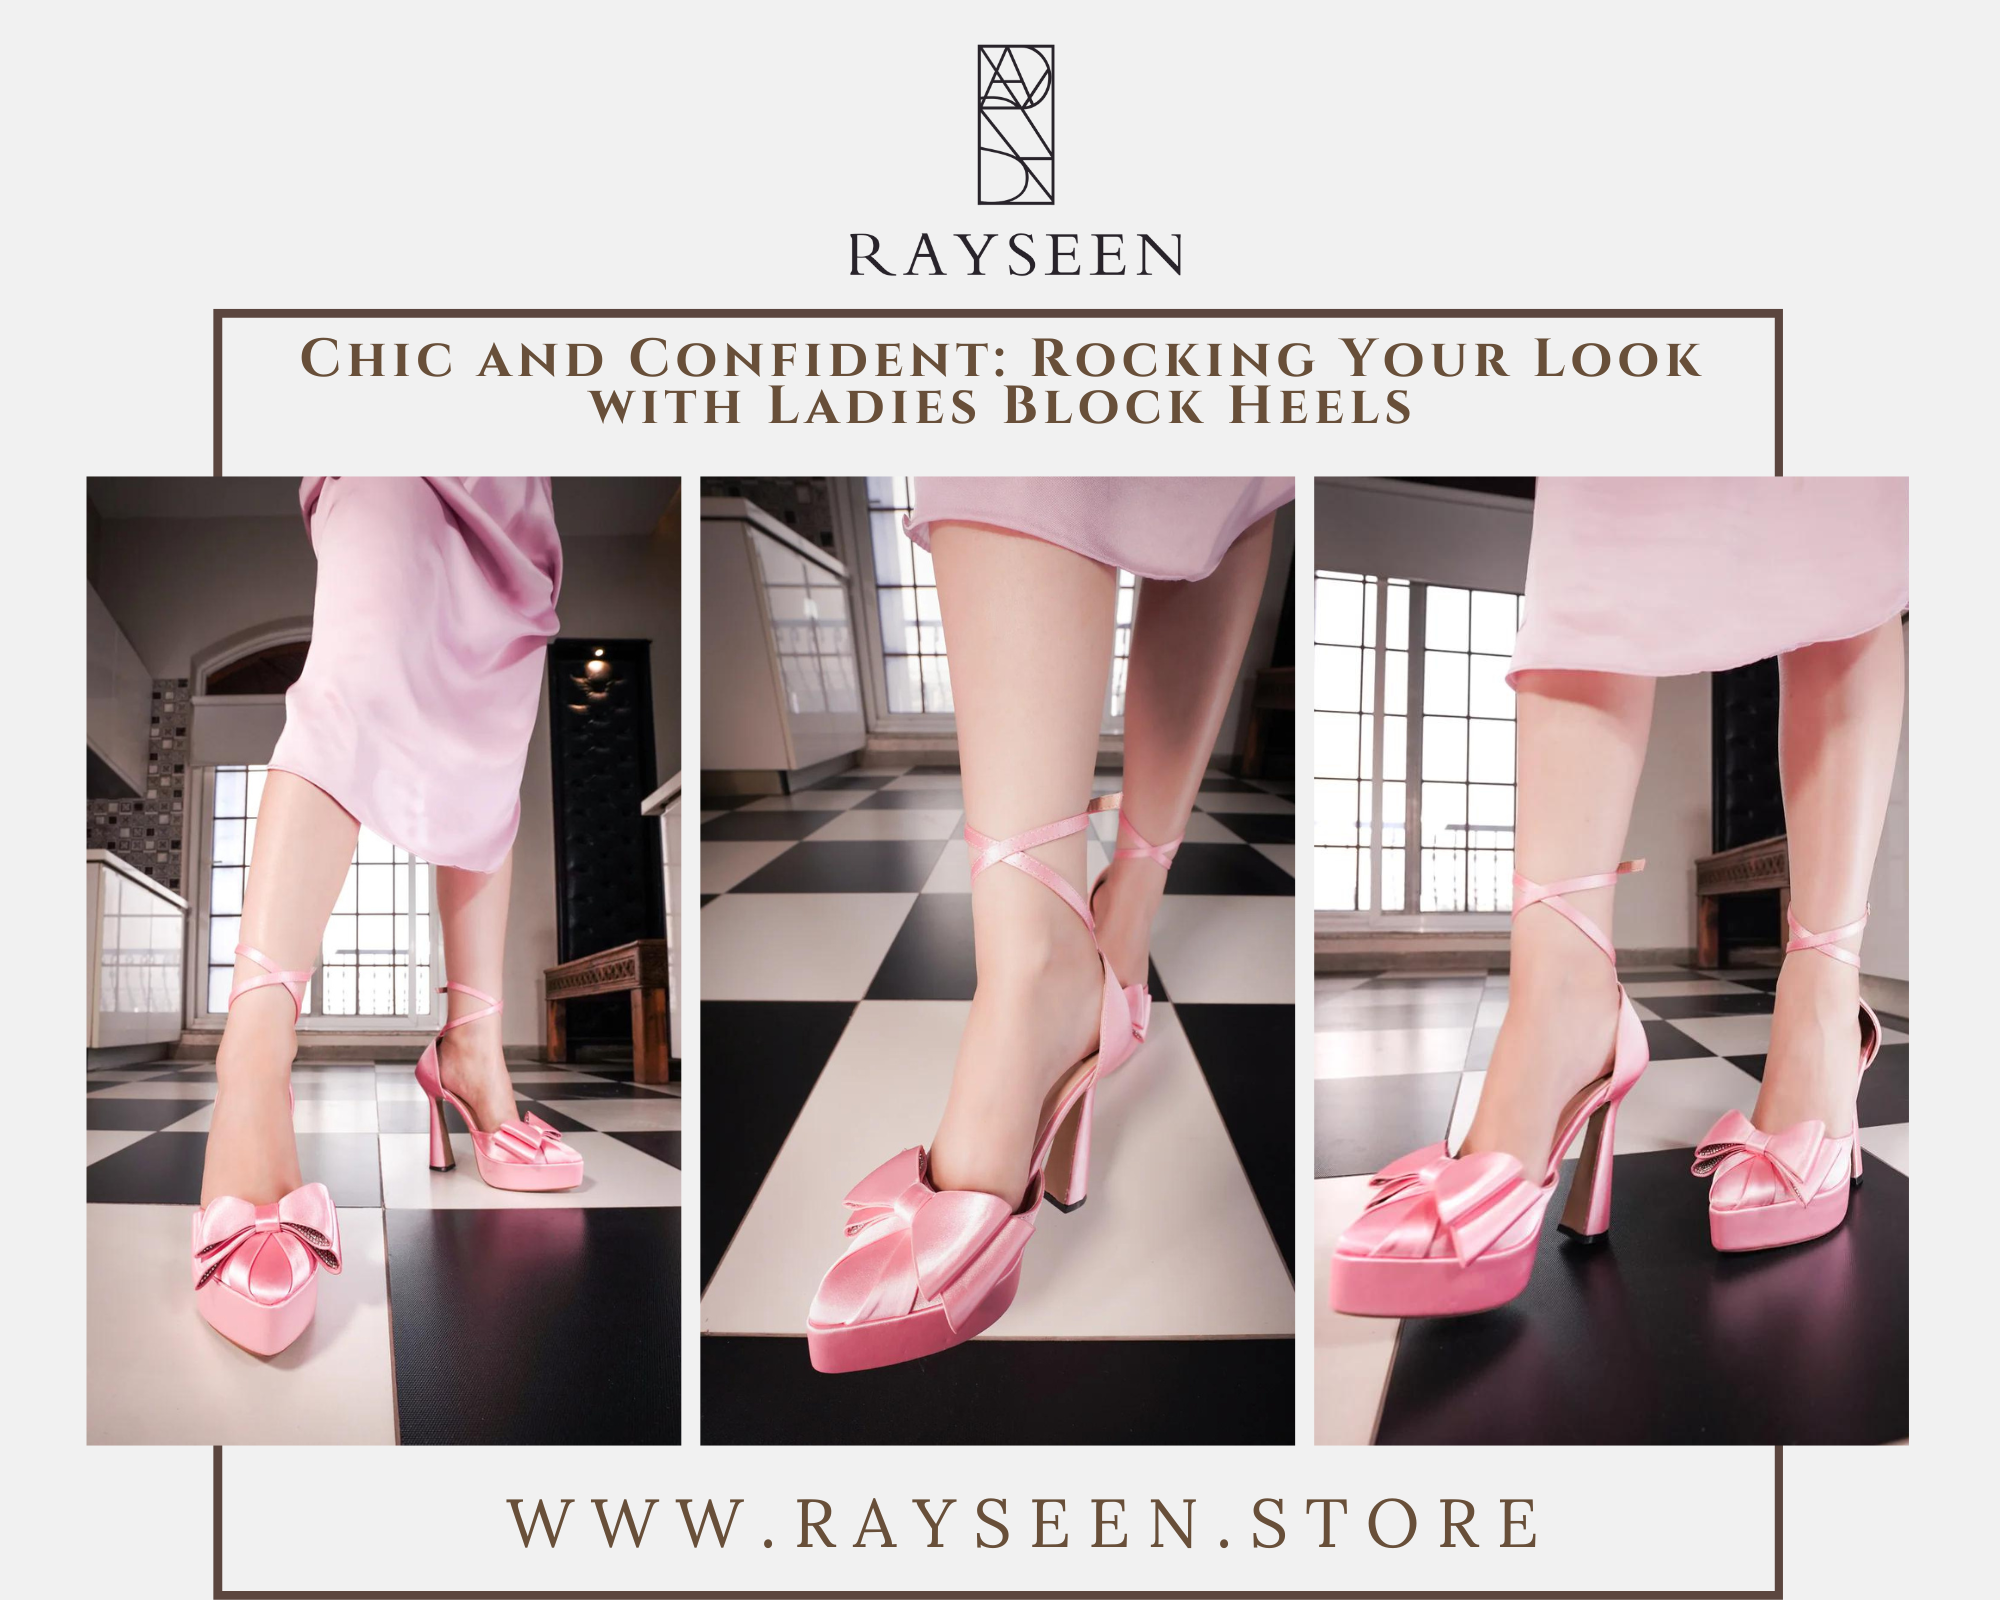 Chic and Confident Rocking Your Look with Ladies Block Heels